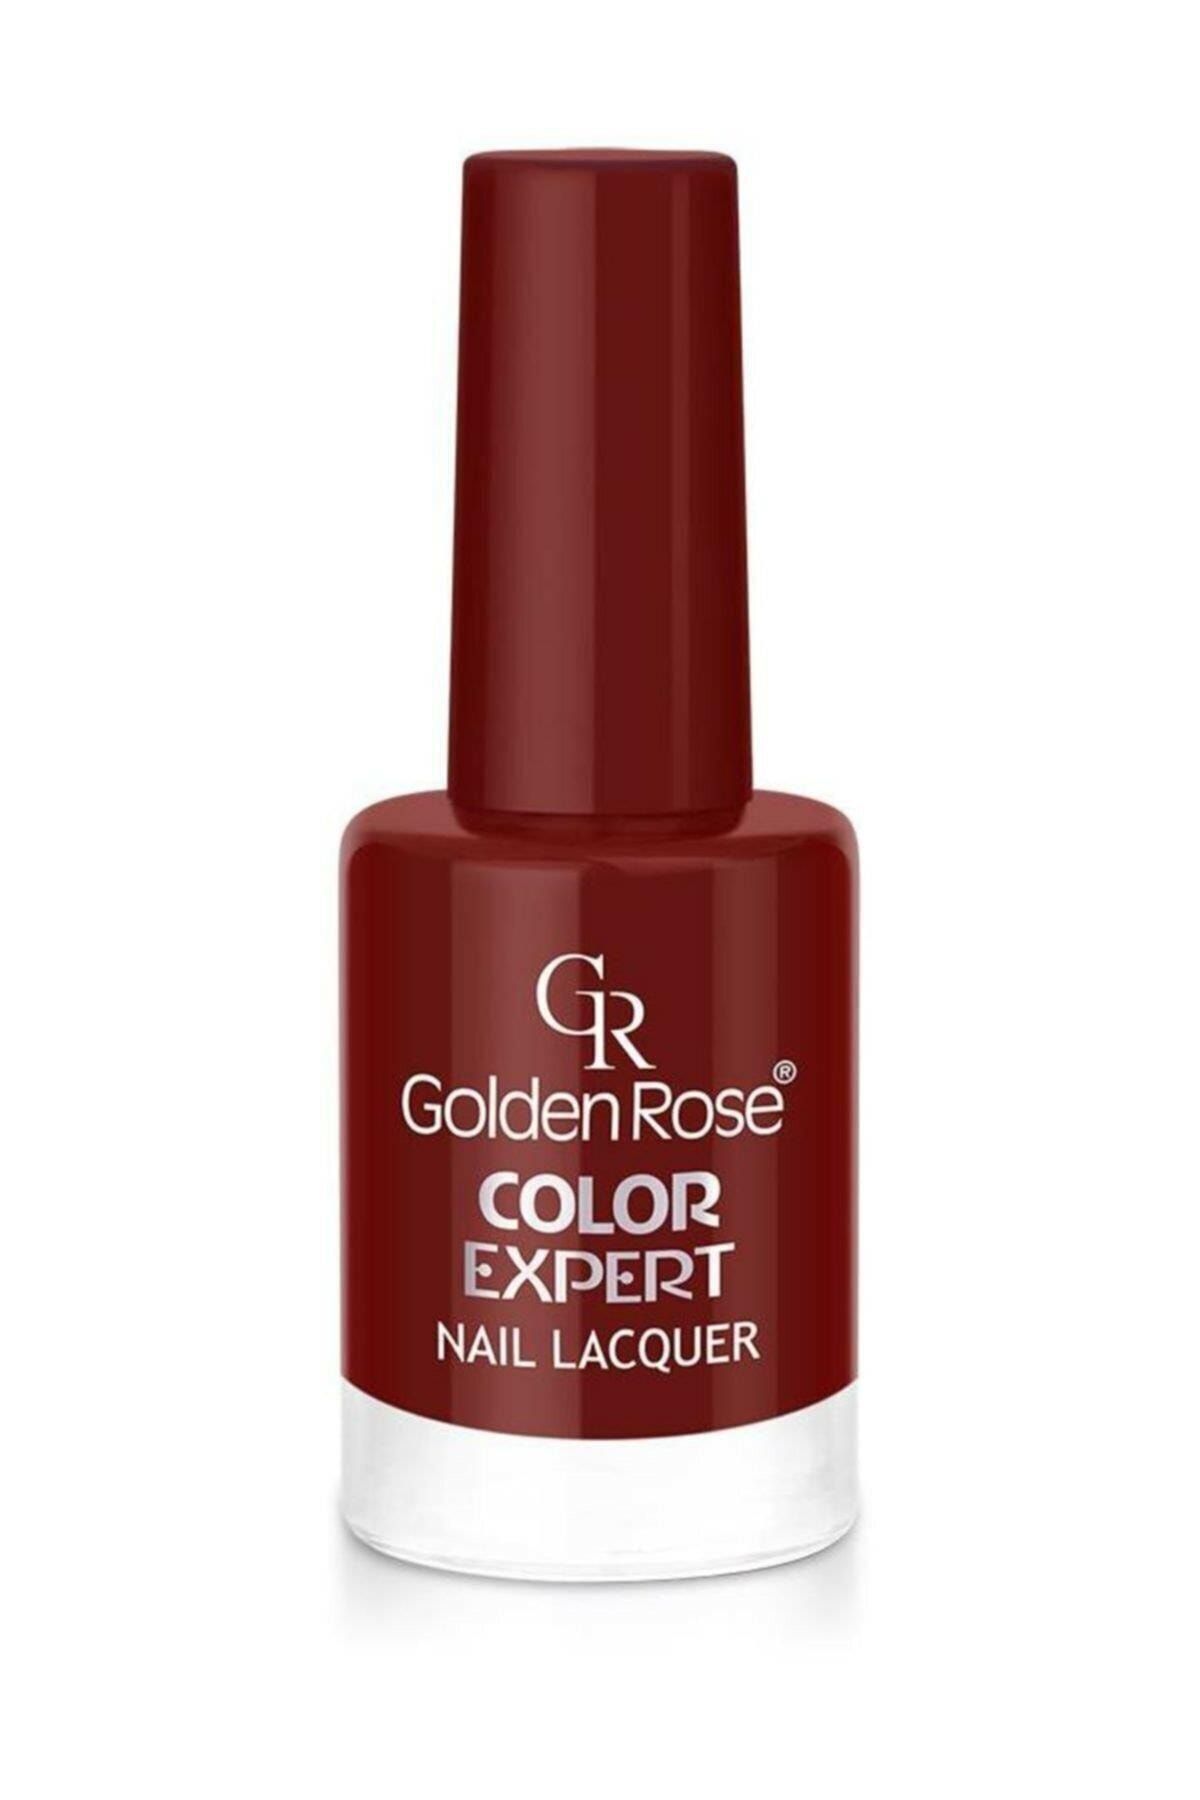 Golden Rose Color Expert Nail Lacquer Oje No:105 Std